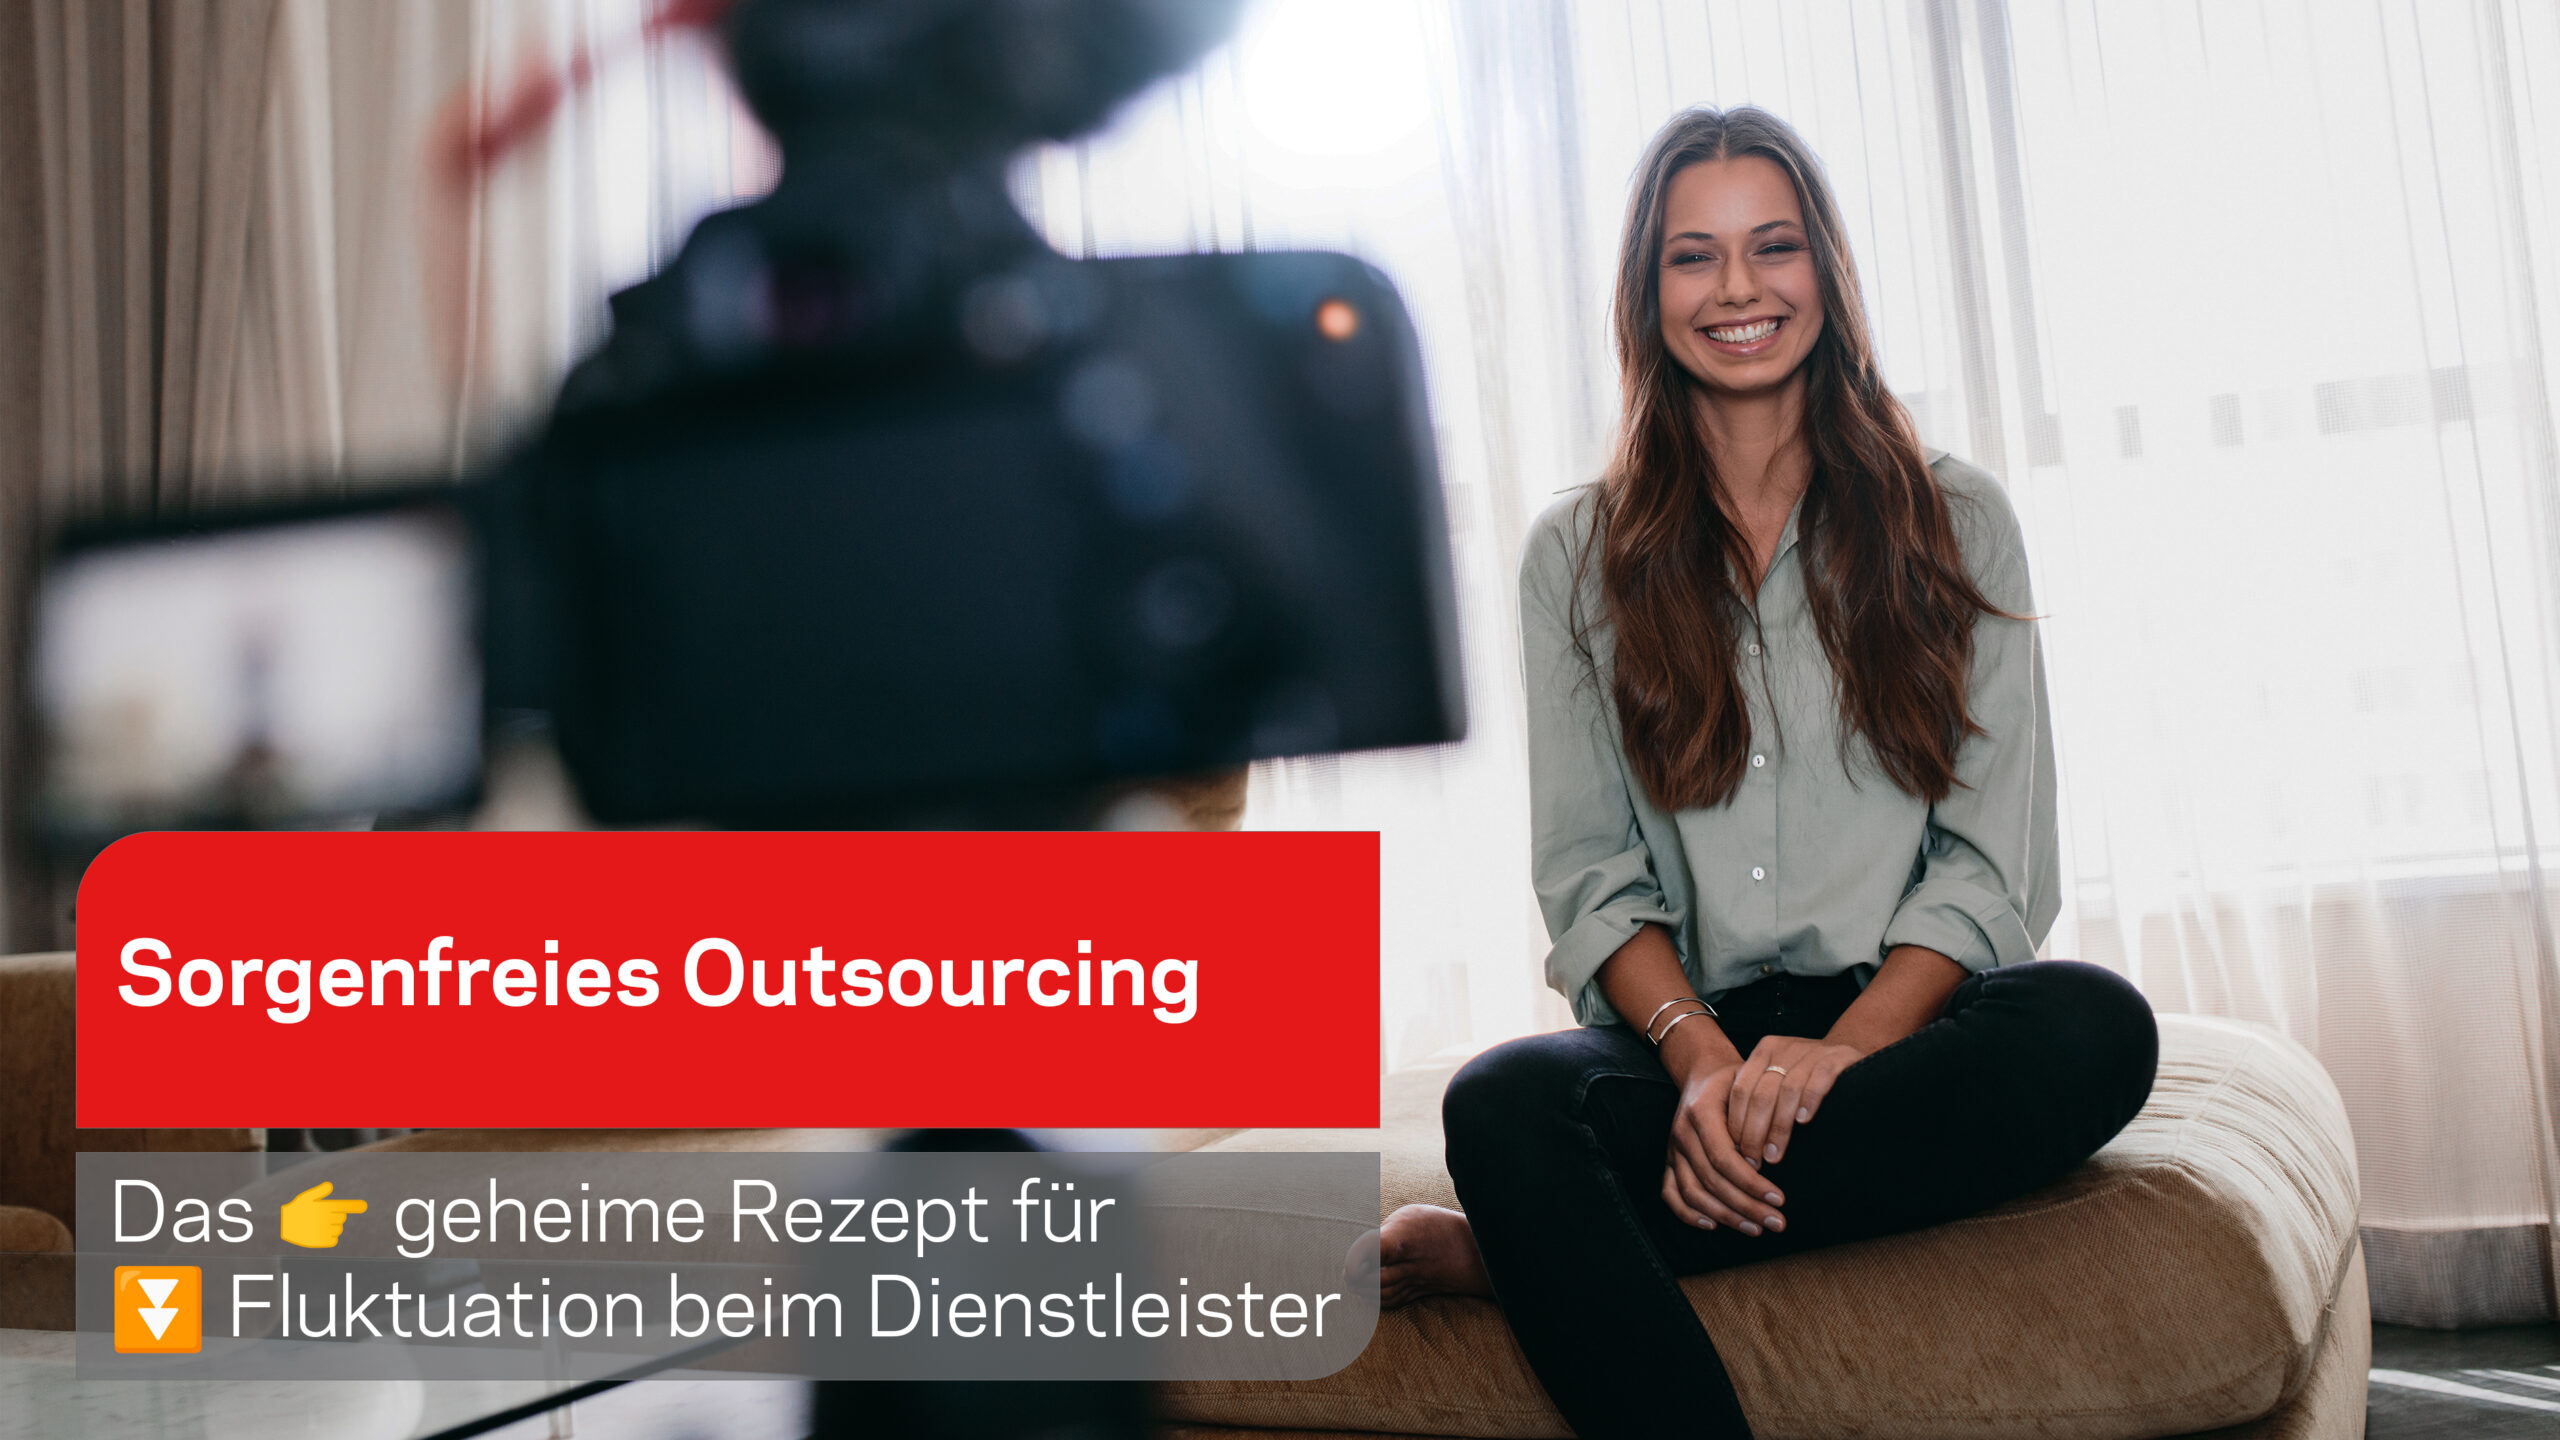 Sorgenfreies Outsourcing